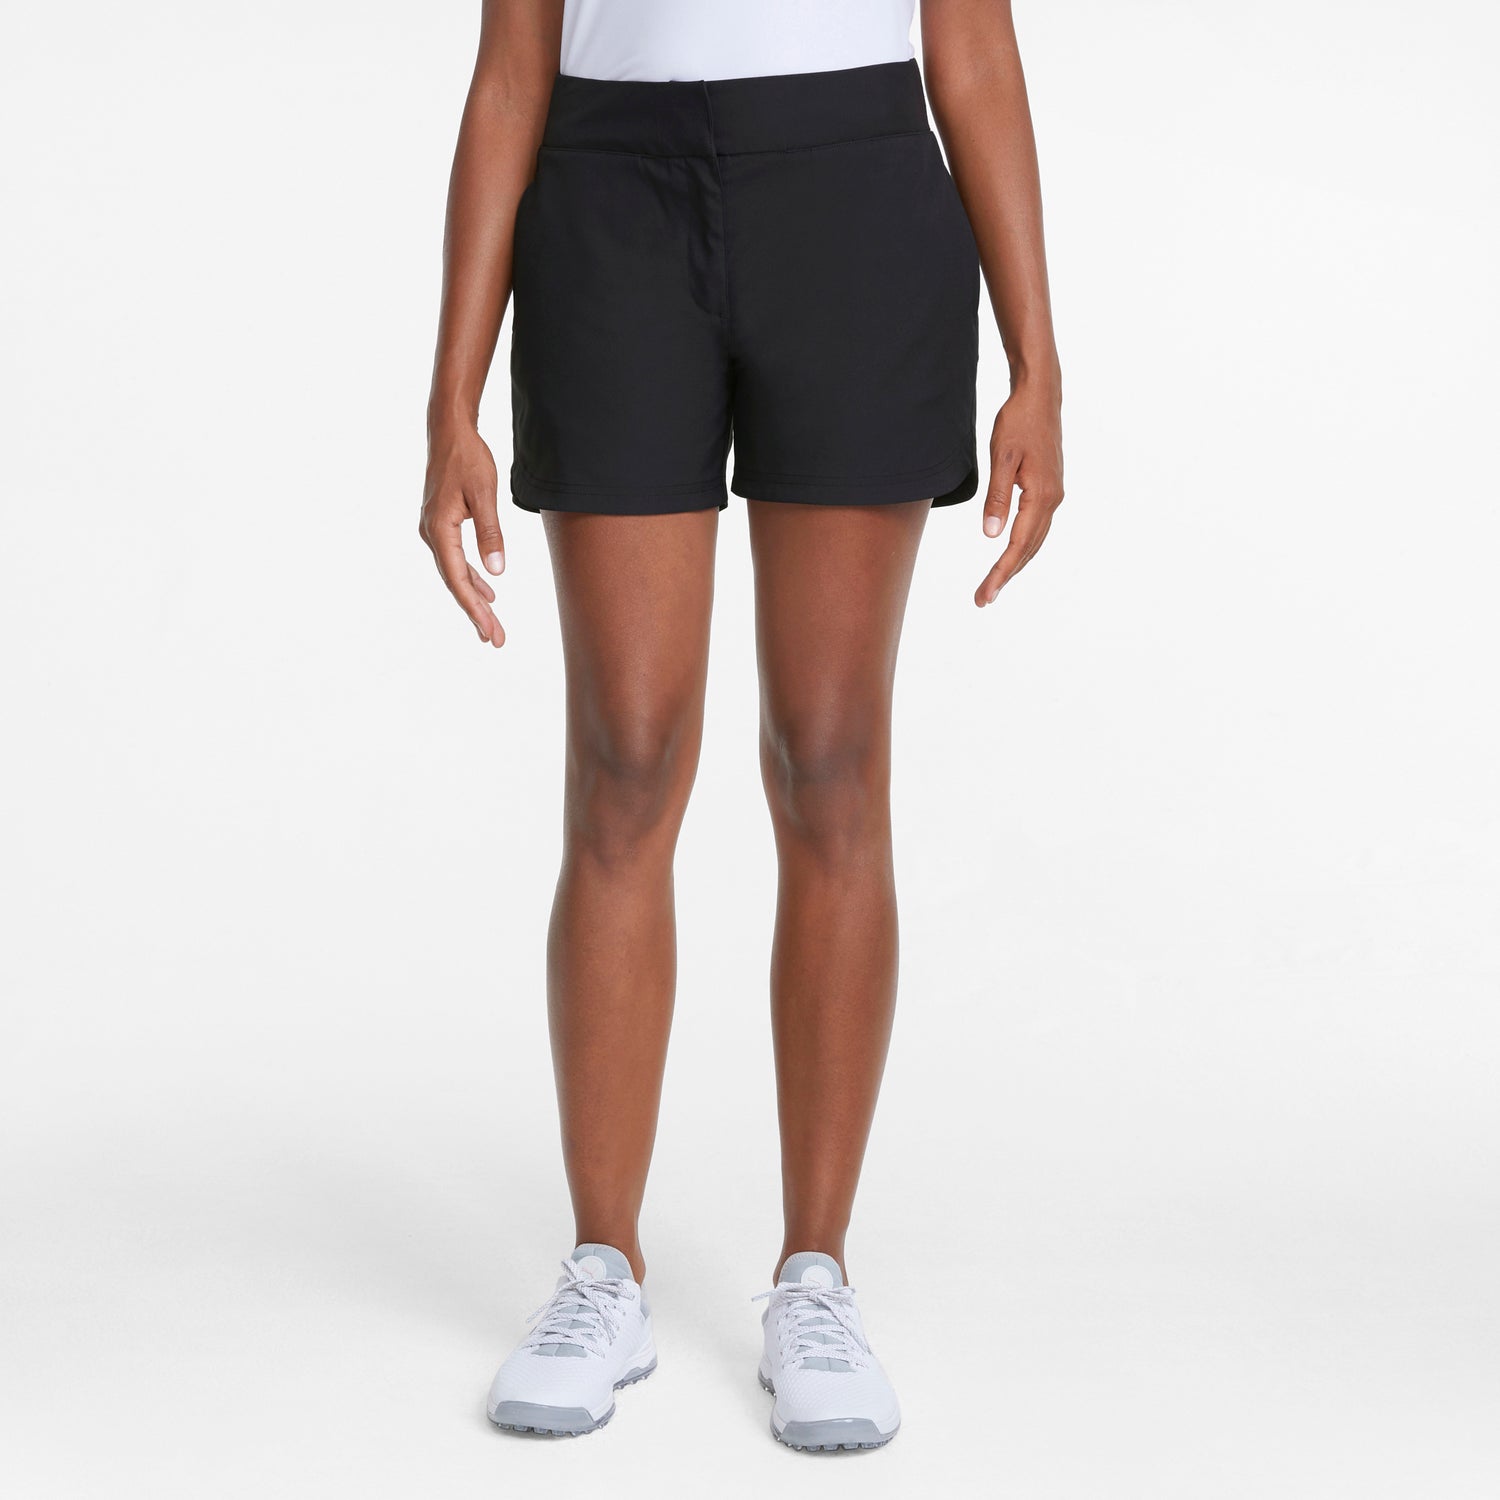 Womens Clothing - Shorts and Skirts